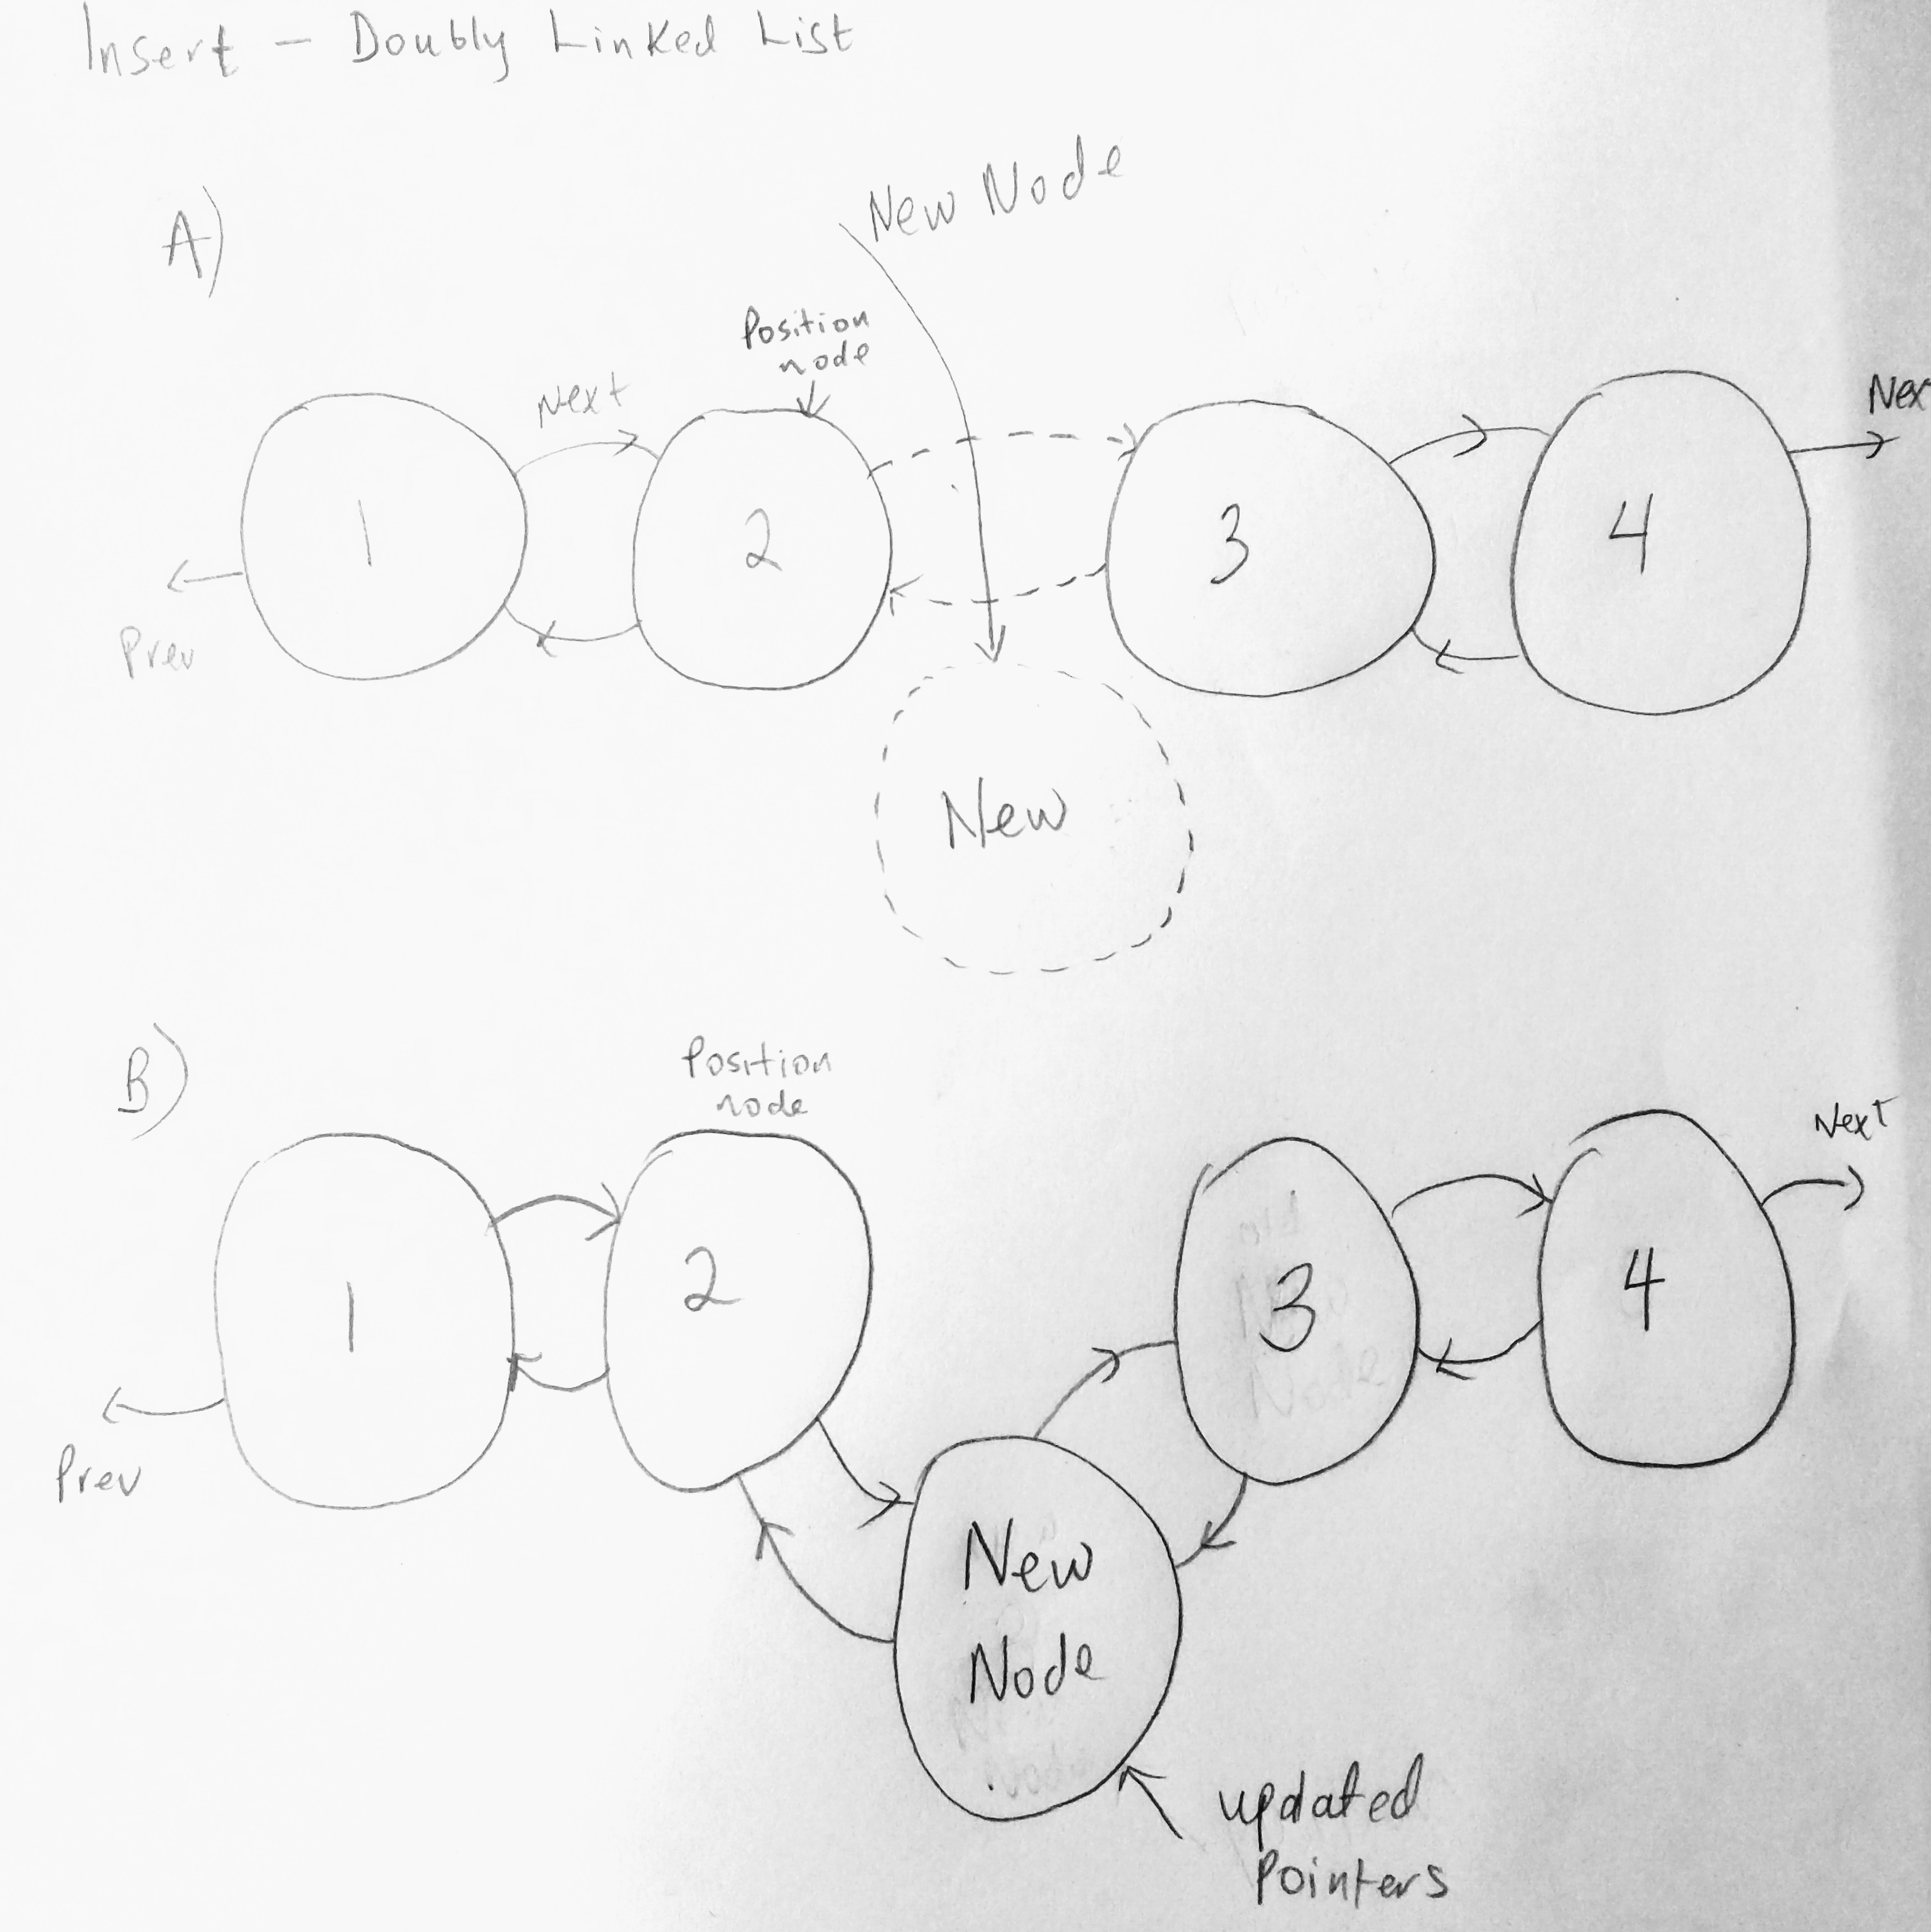 Doubly Linked List Insert